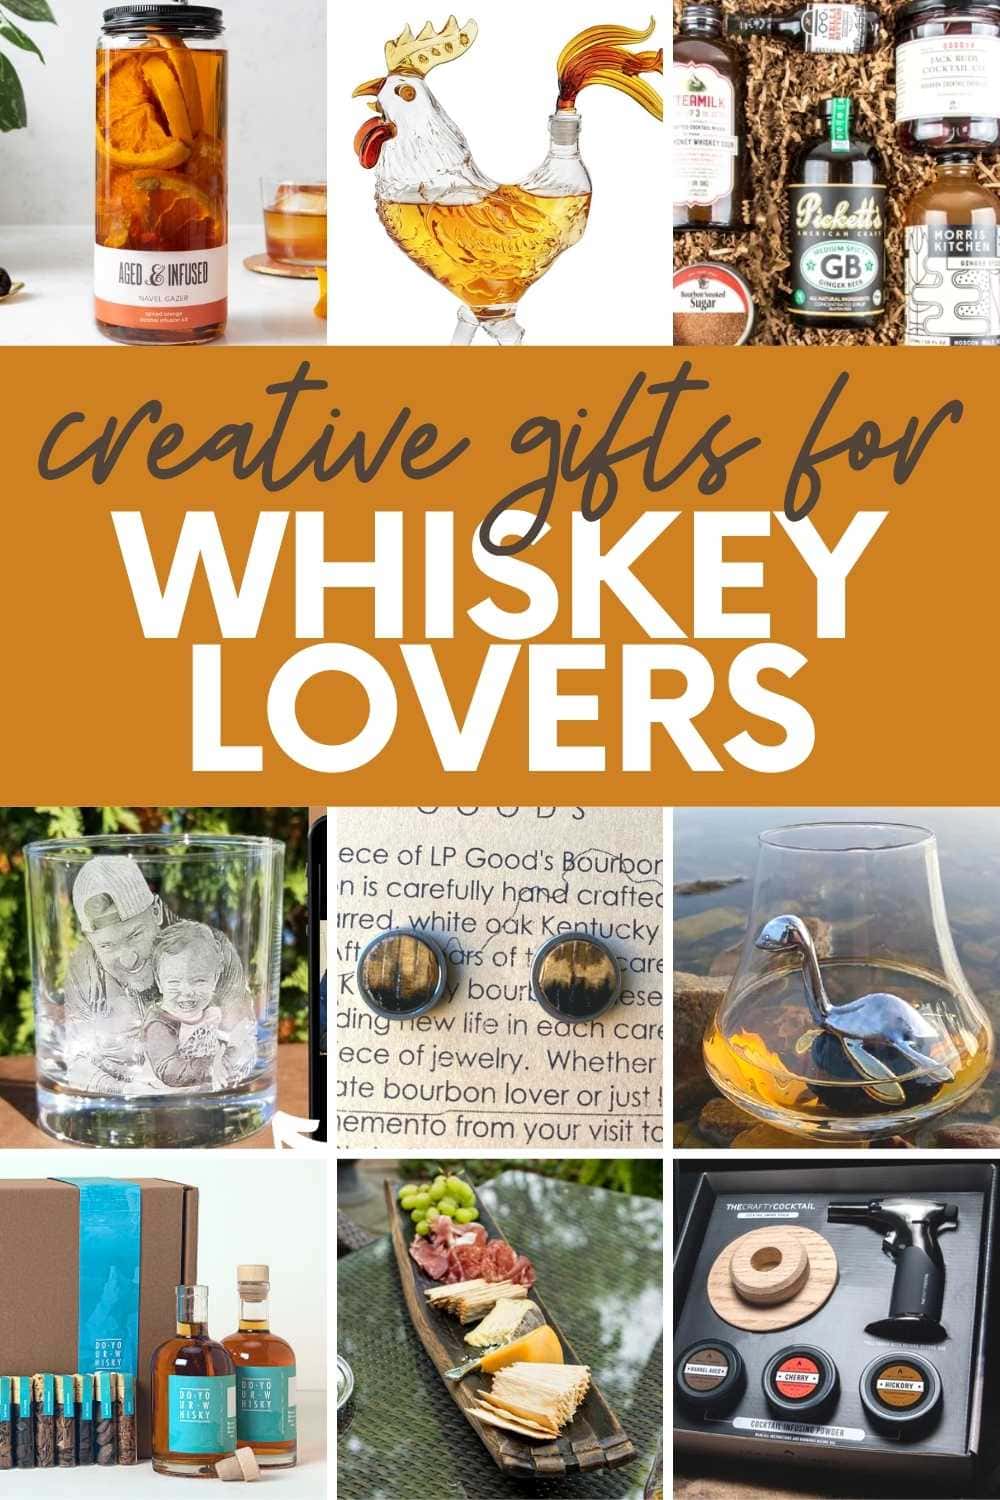 A collage of images showing gifts for whiskey lovers, including a rooster decanter, a smoking kit, and bourbon-infused foods. A text overlay reads "Creative Gifts for Whiskey Lovers"